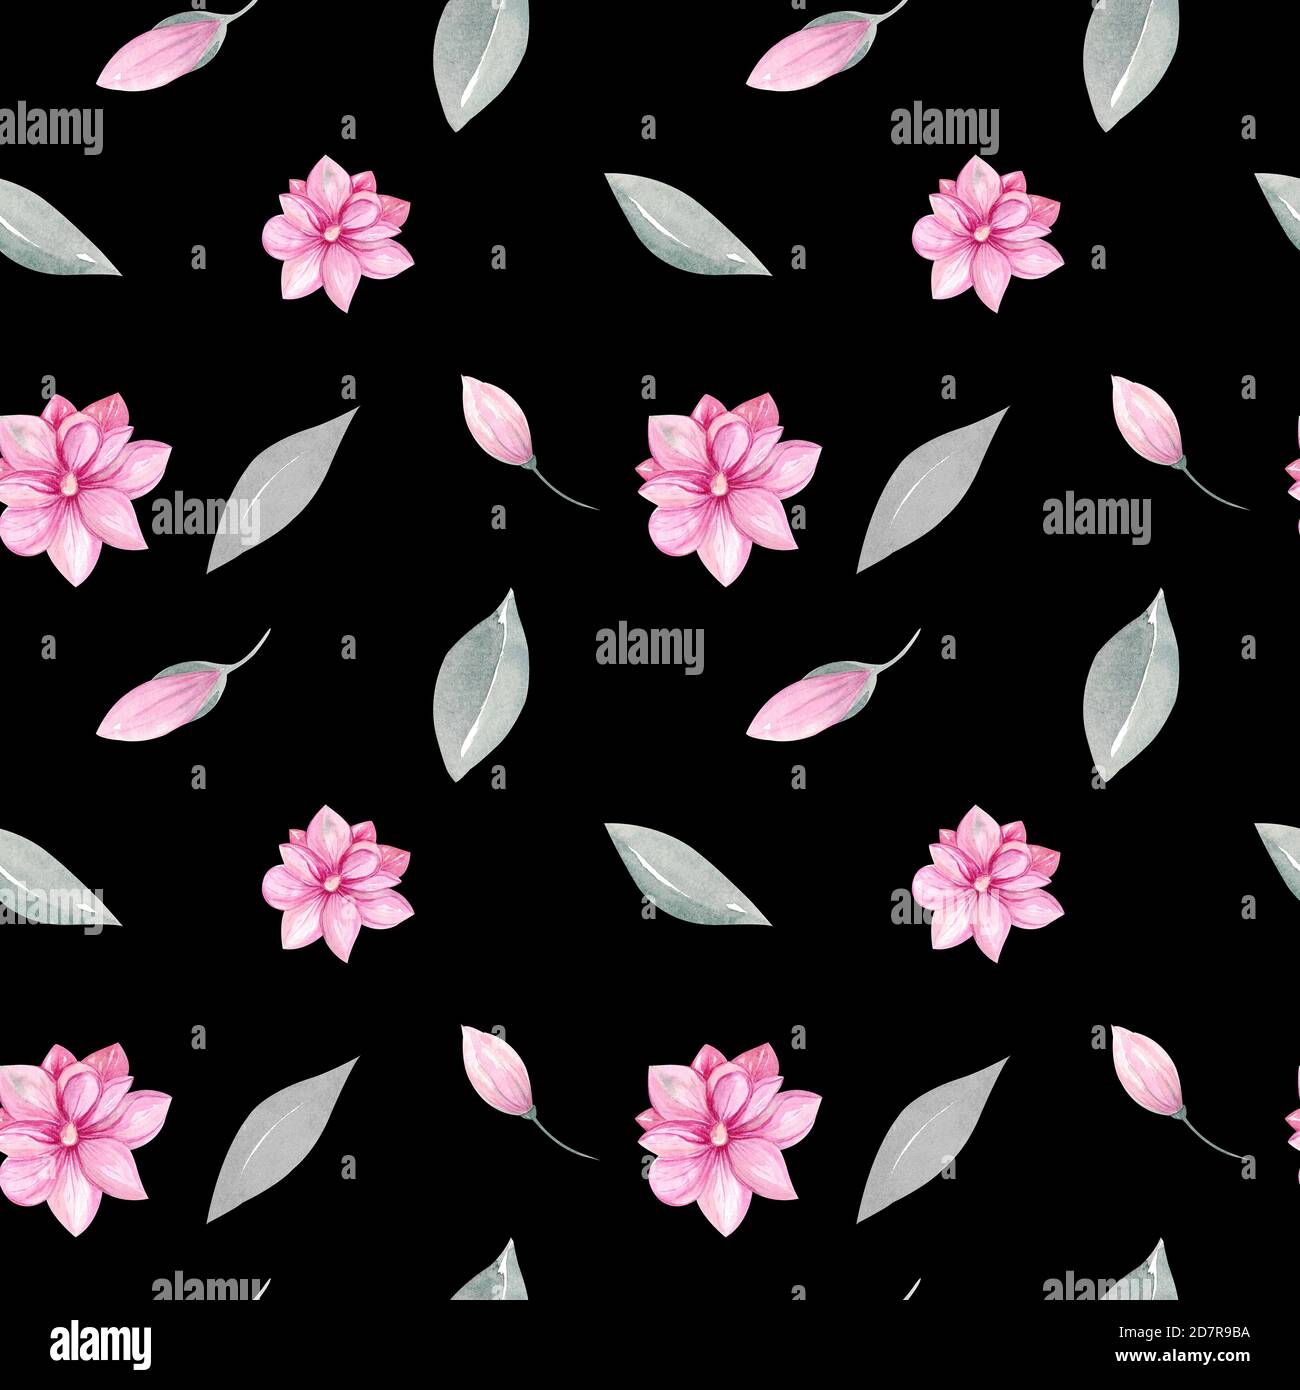 Seamless pattern of floral elements. Magnolia and pink tulips, spring greenery, foliage, branches on a black background Stock Photo